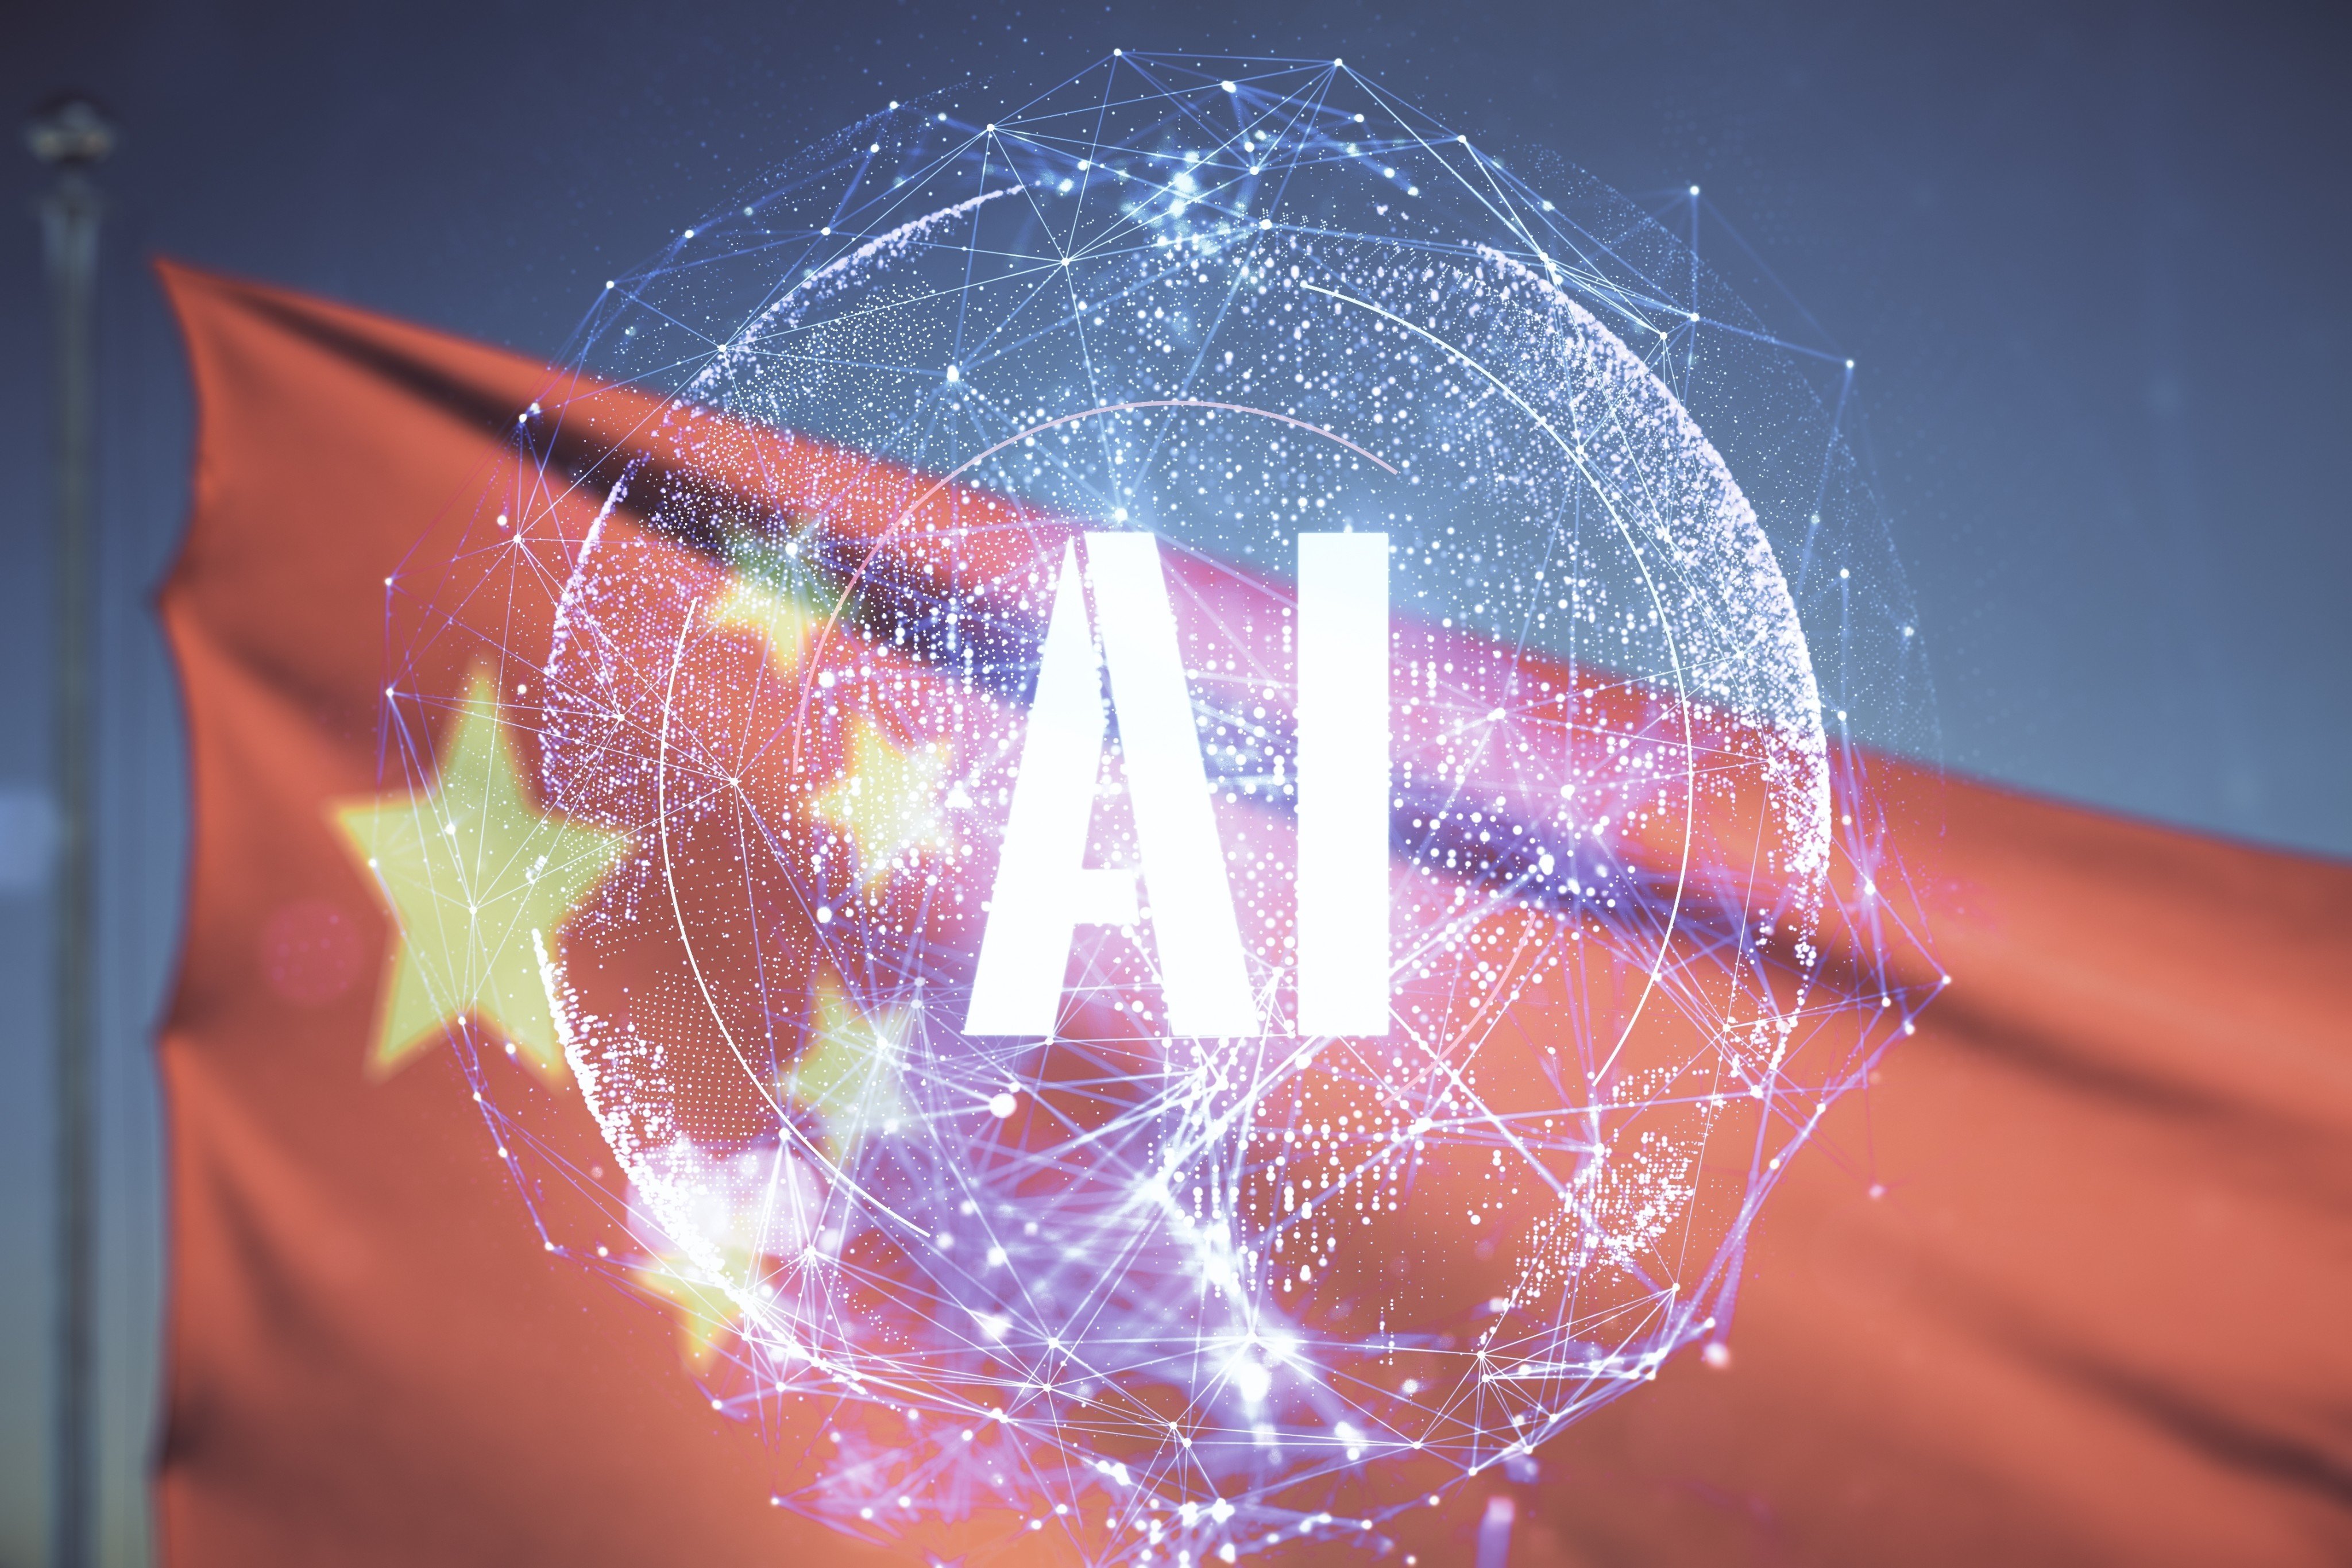 China has been a leader in technology such as facial recognition, but lags behind the use in generative AI. Photo: Shutterstock Images